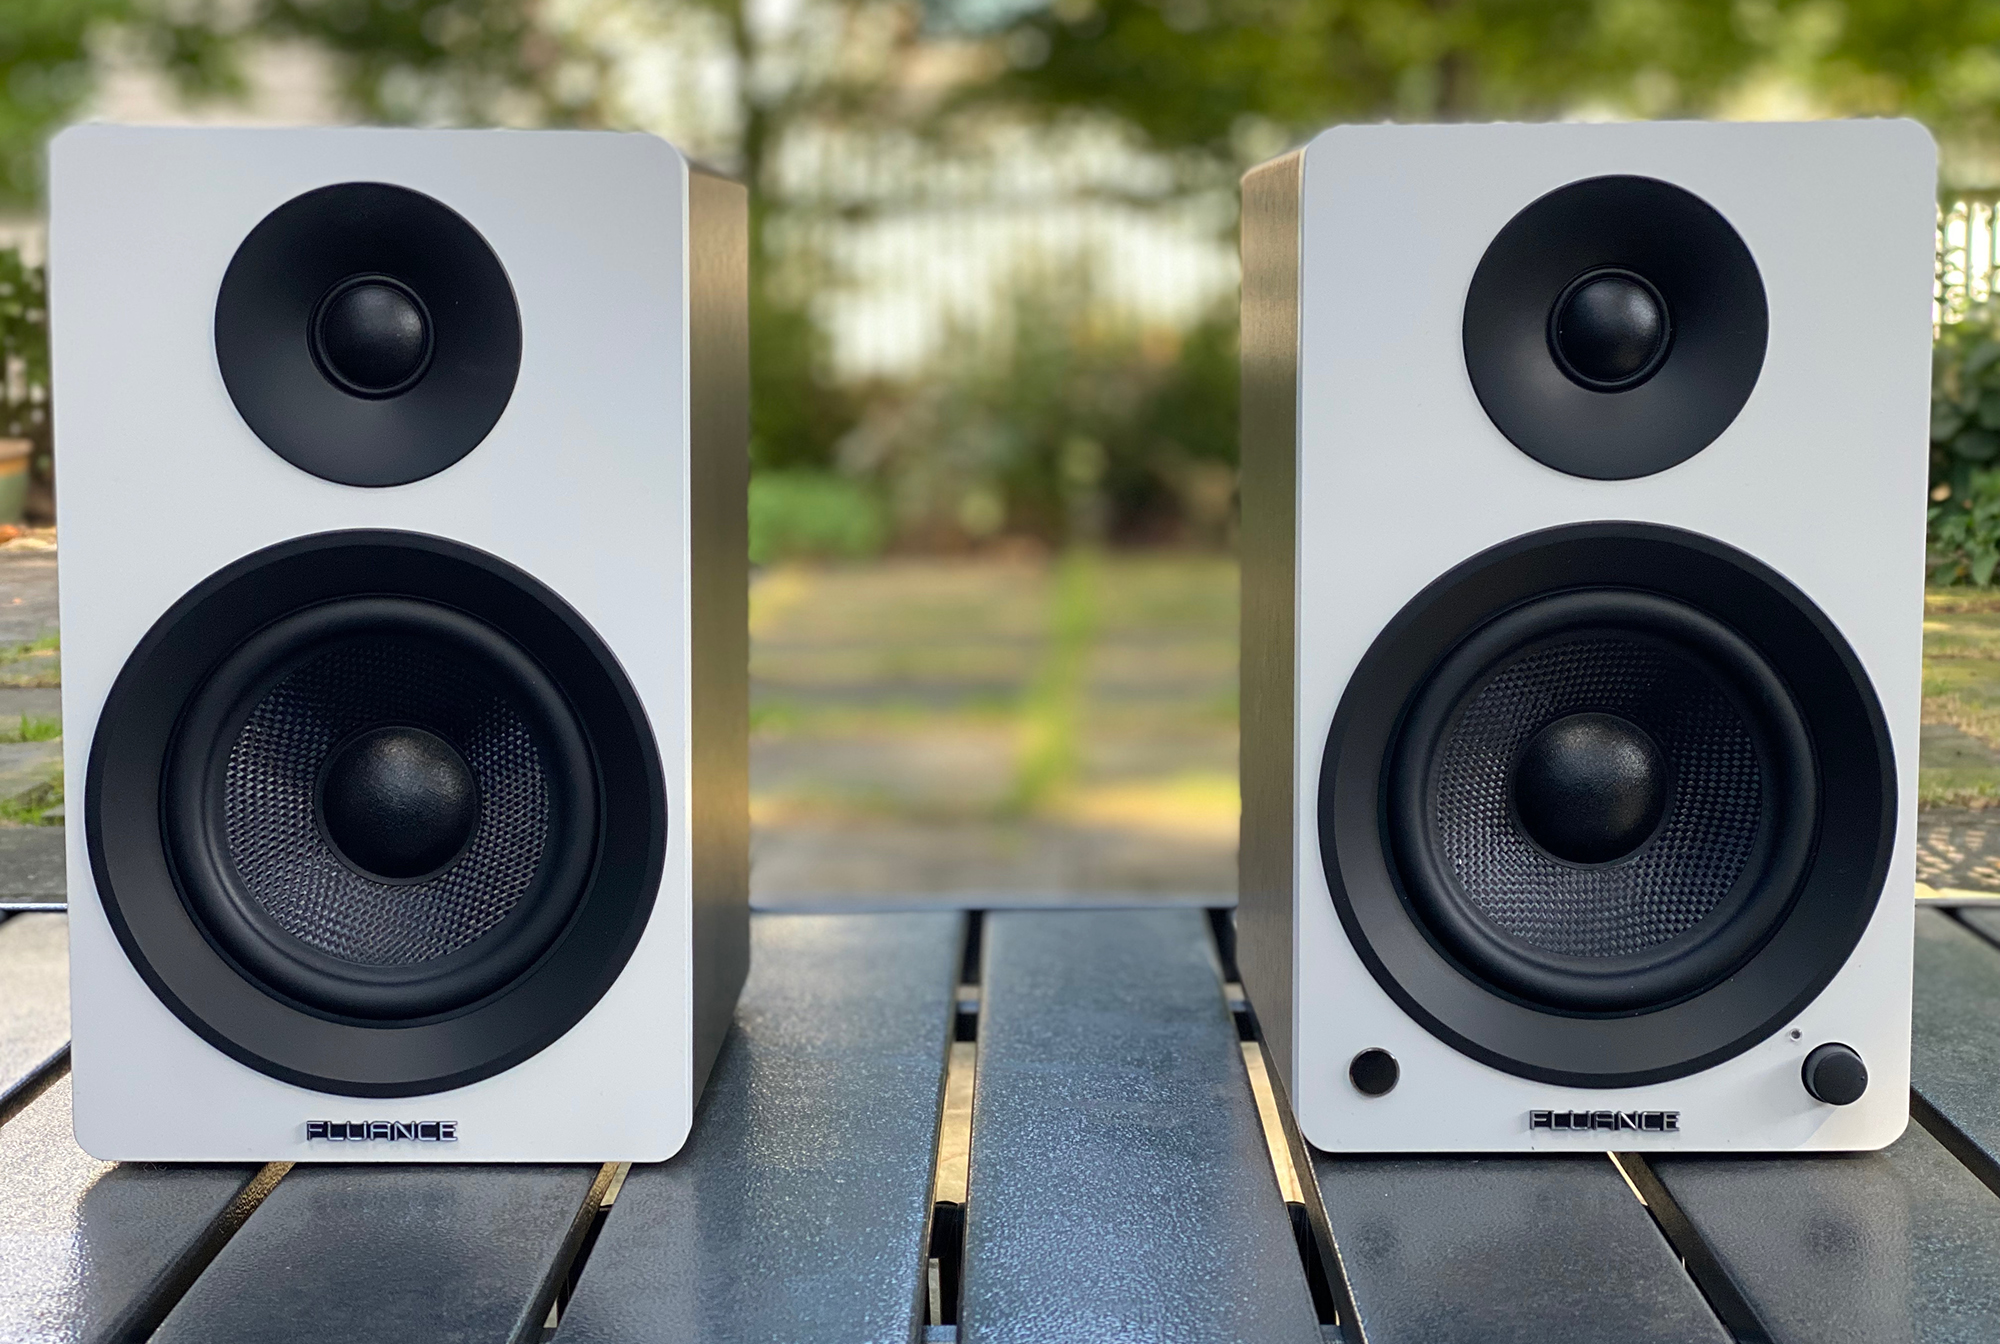 These last-minute Prime Day speaker deals elevate your audio while lowering costs